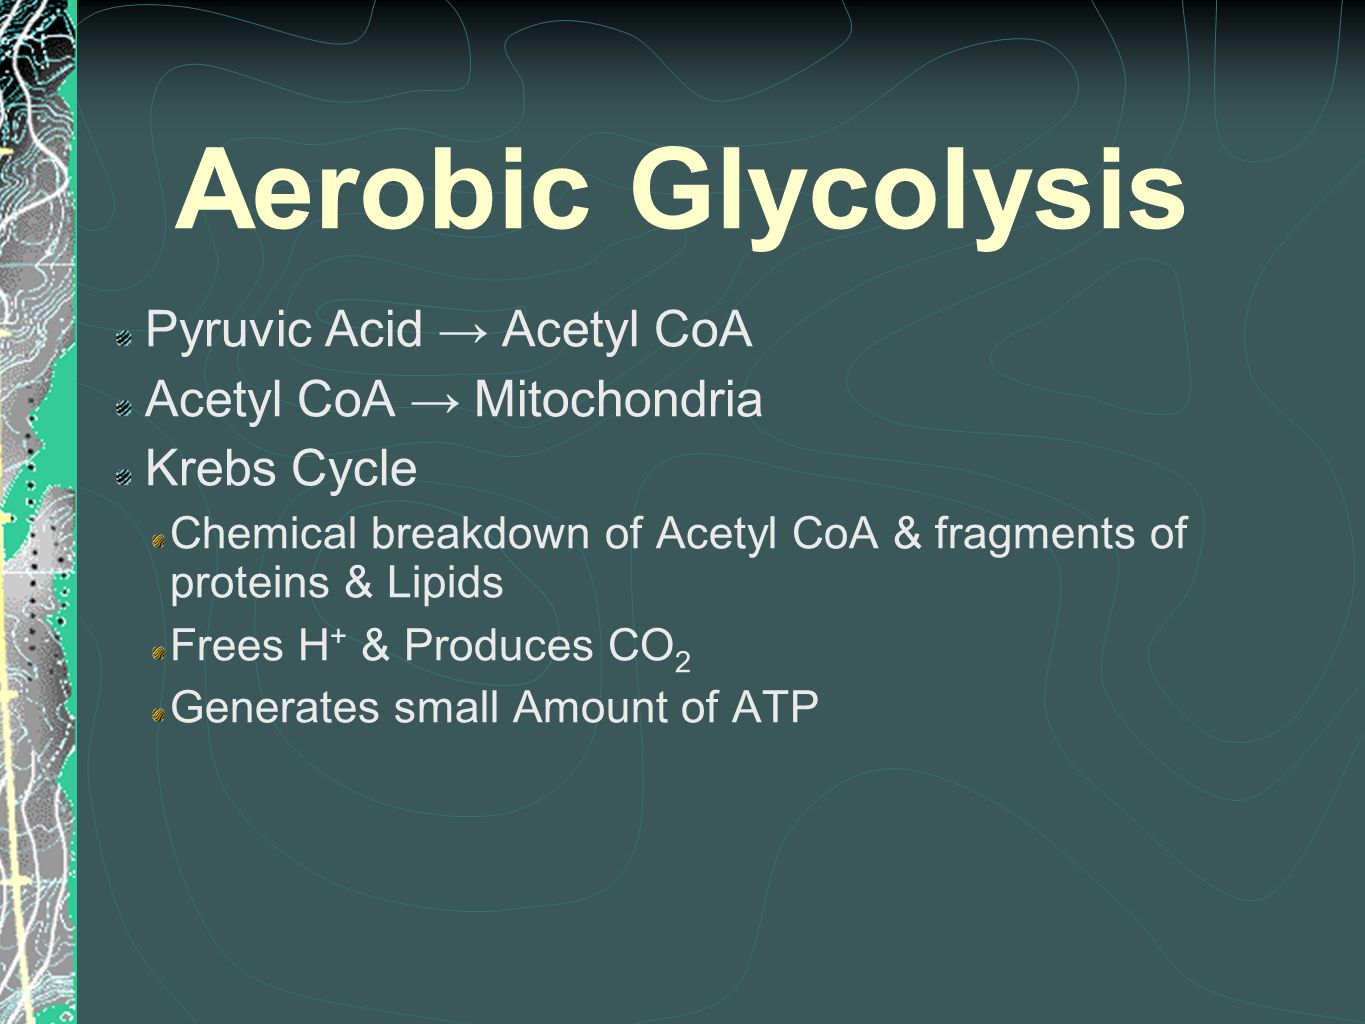 Aerobic Glycolysis Pyruvic Acid → Acetyl CoA Acetyl CoA → Mitochondria Krebs Cycle Chemical breakdown of Acetyl CoA & fragments of proteins & Lipids Frees H + & Produces CO 2 Generates small Amount of ATP